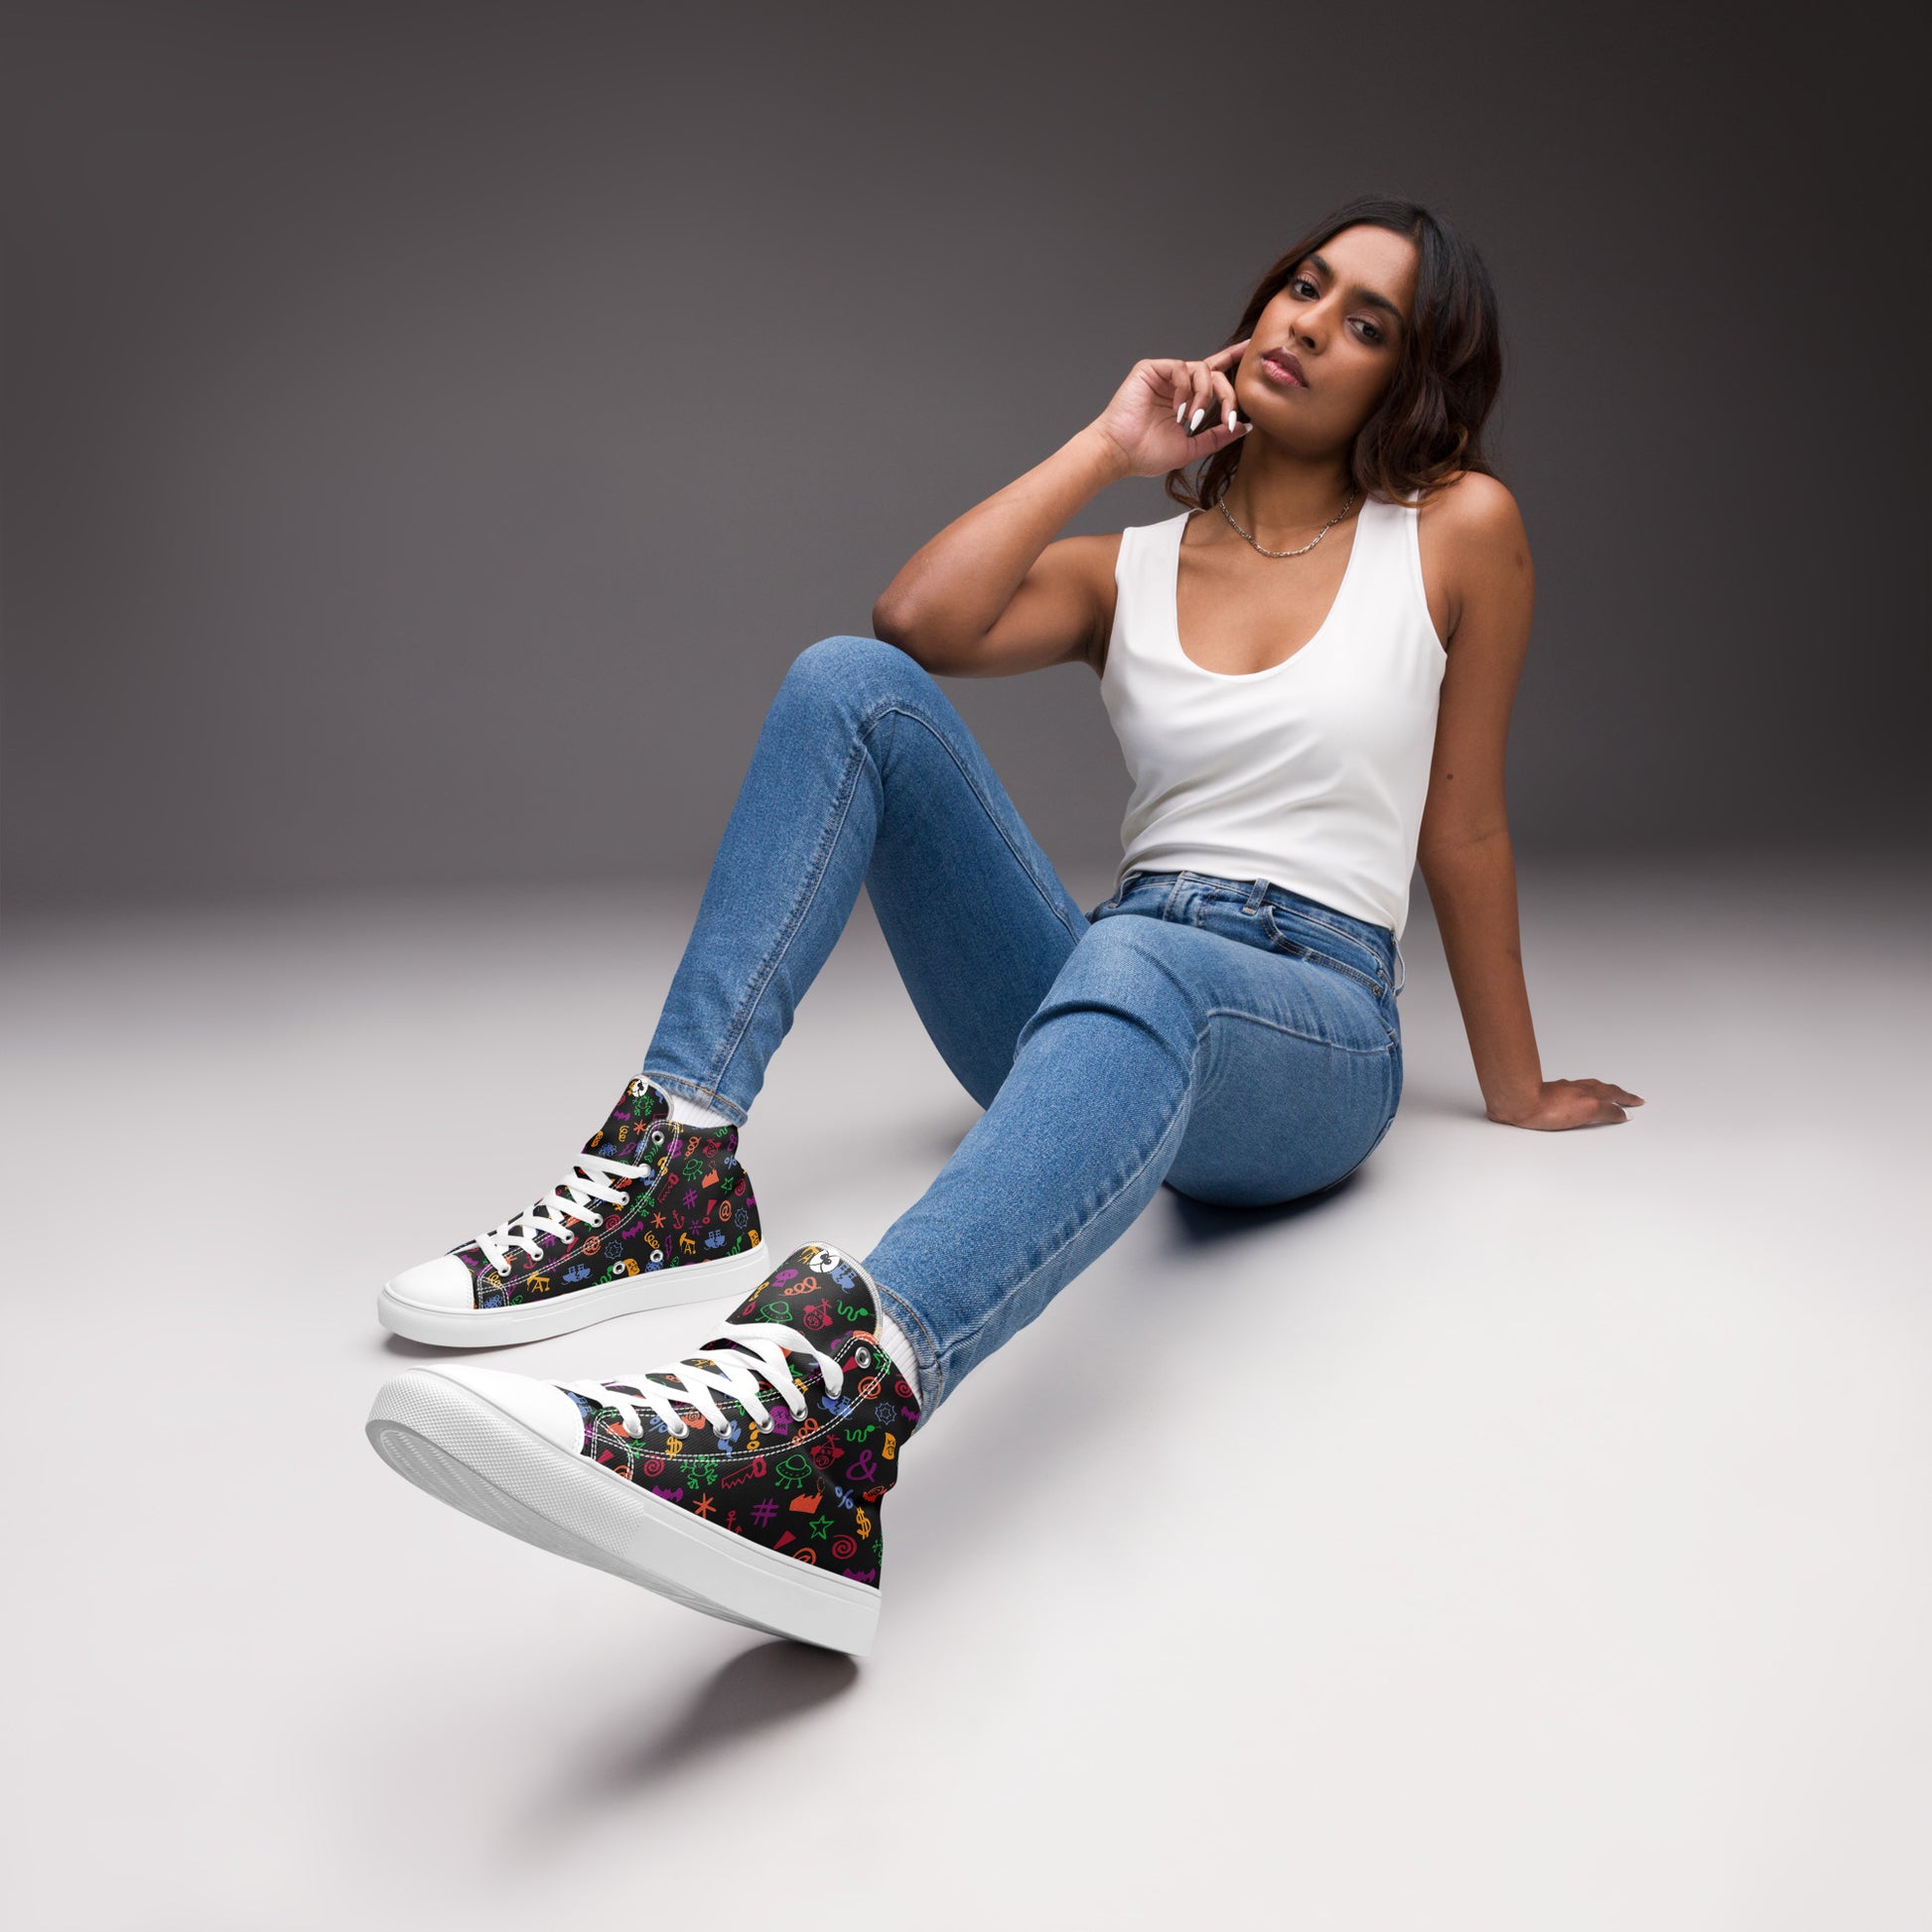 Wear these Women’s high top canvas shoes, swear with confidence, keep your smile. Lifestyle